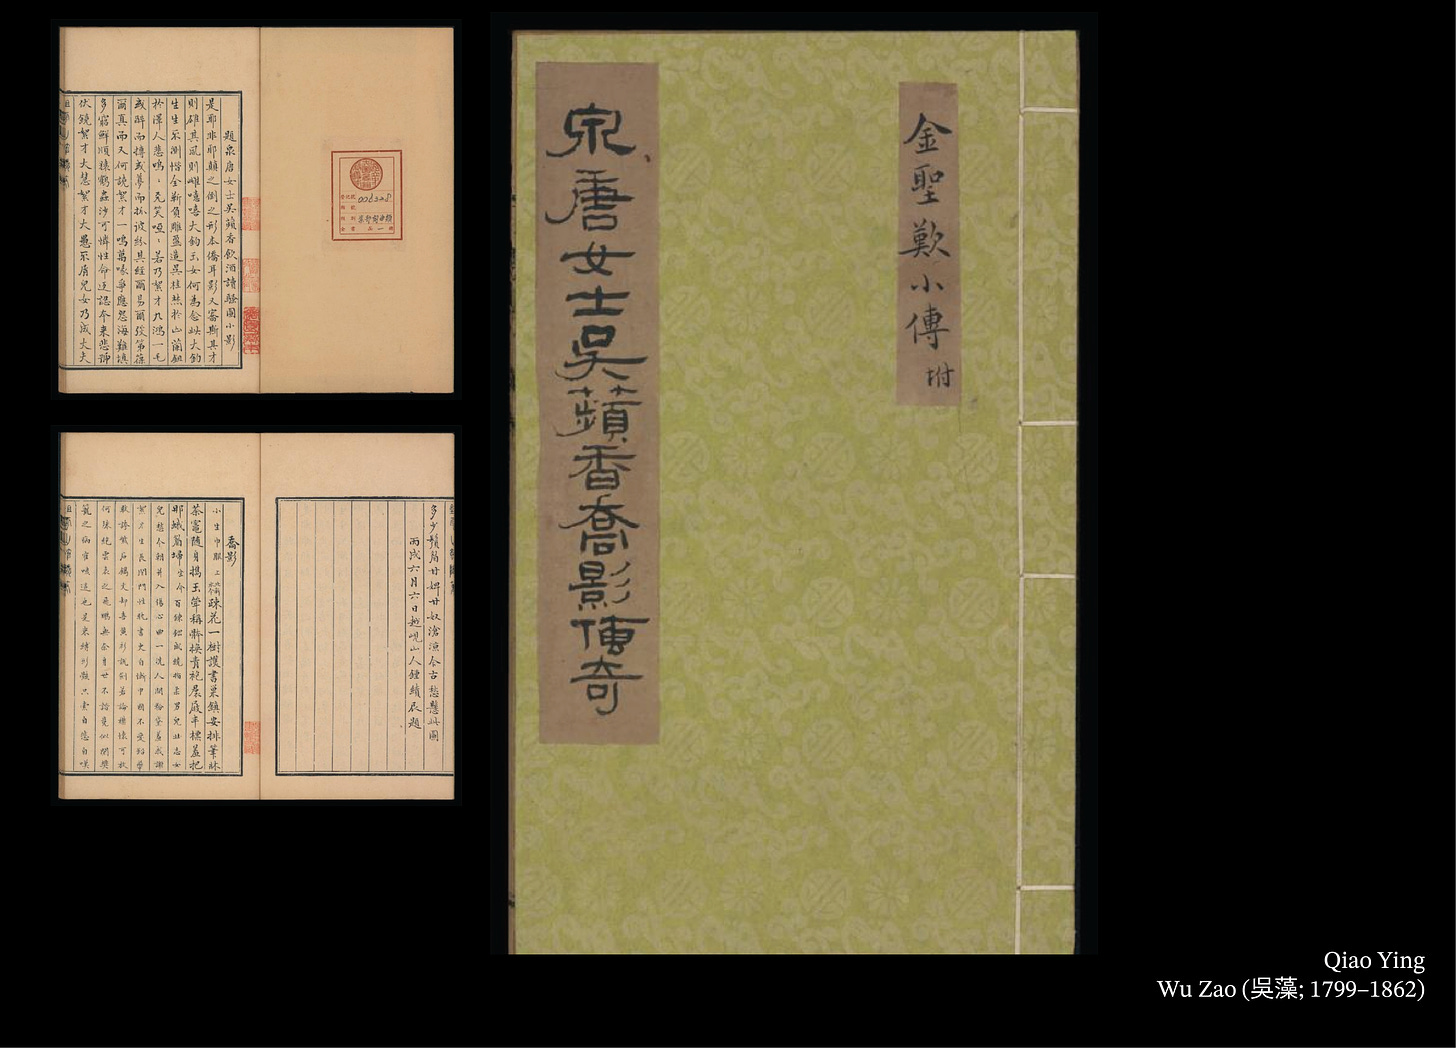 Scans of the cover and interior of the book Qiao Ying showing Chinese calligraphy